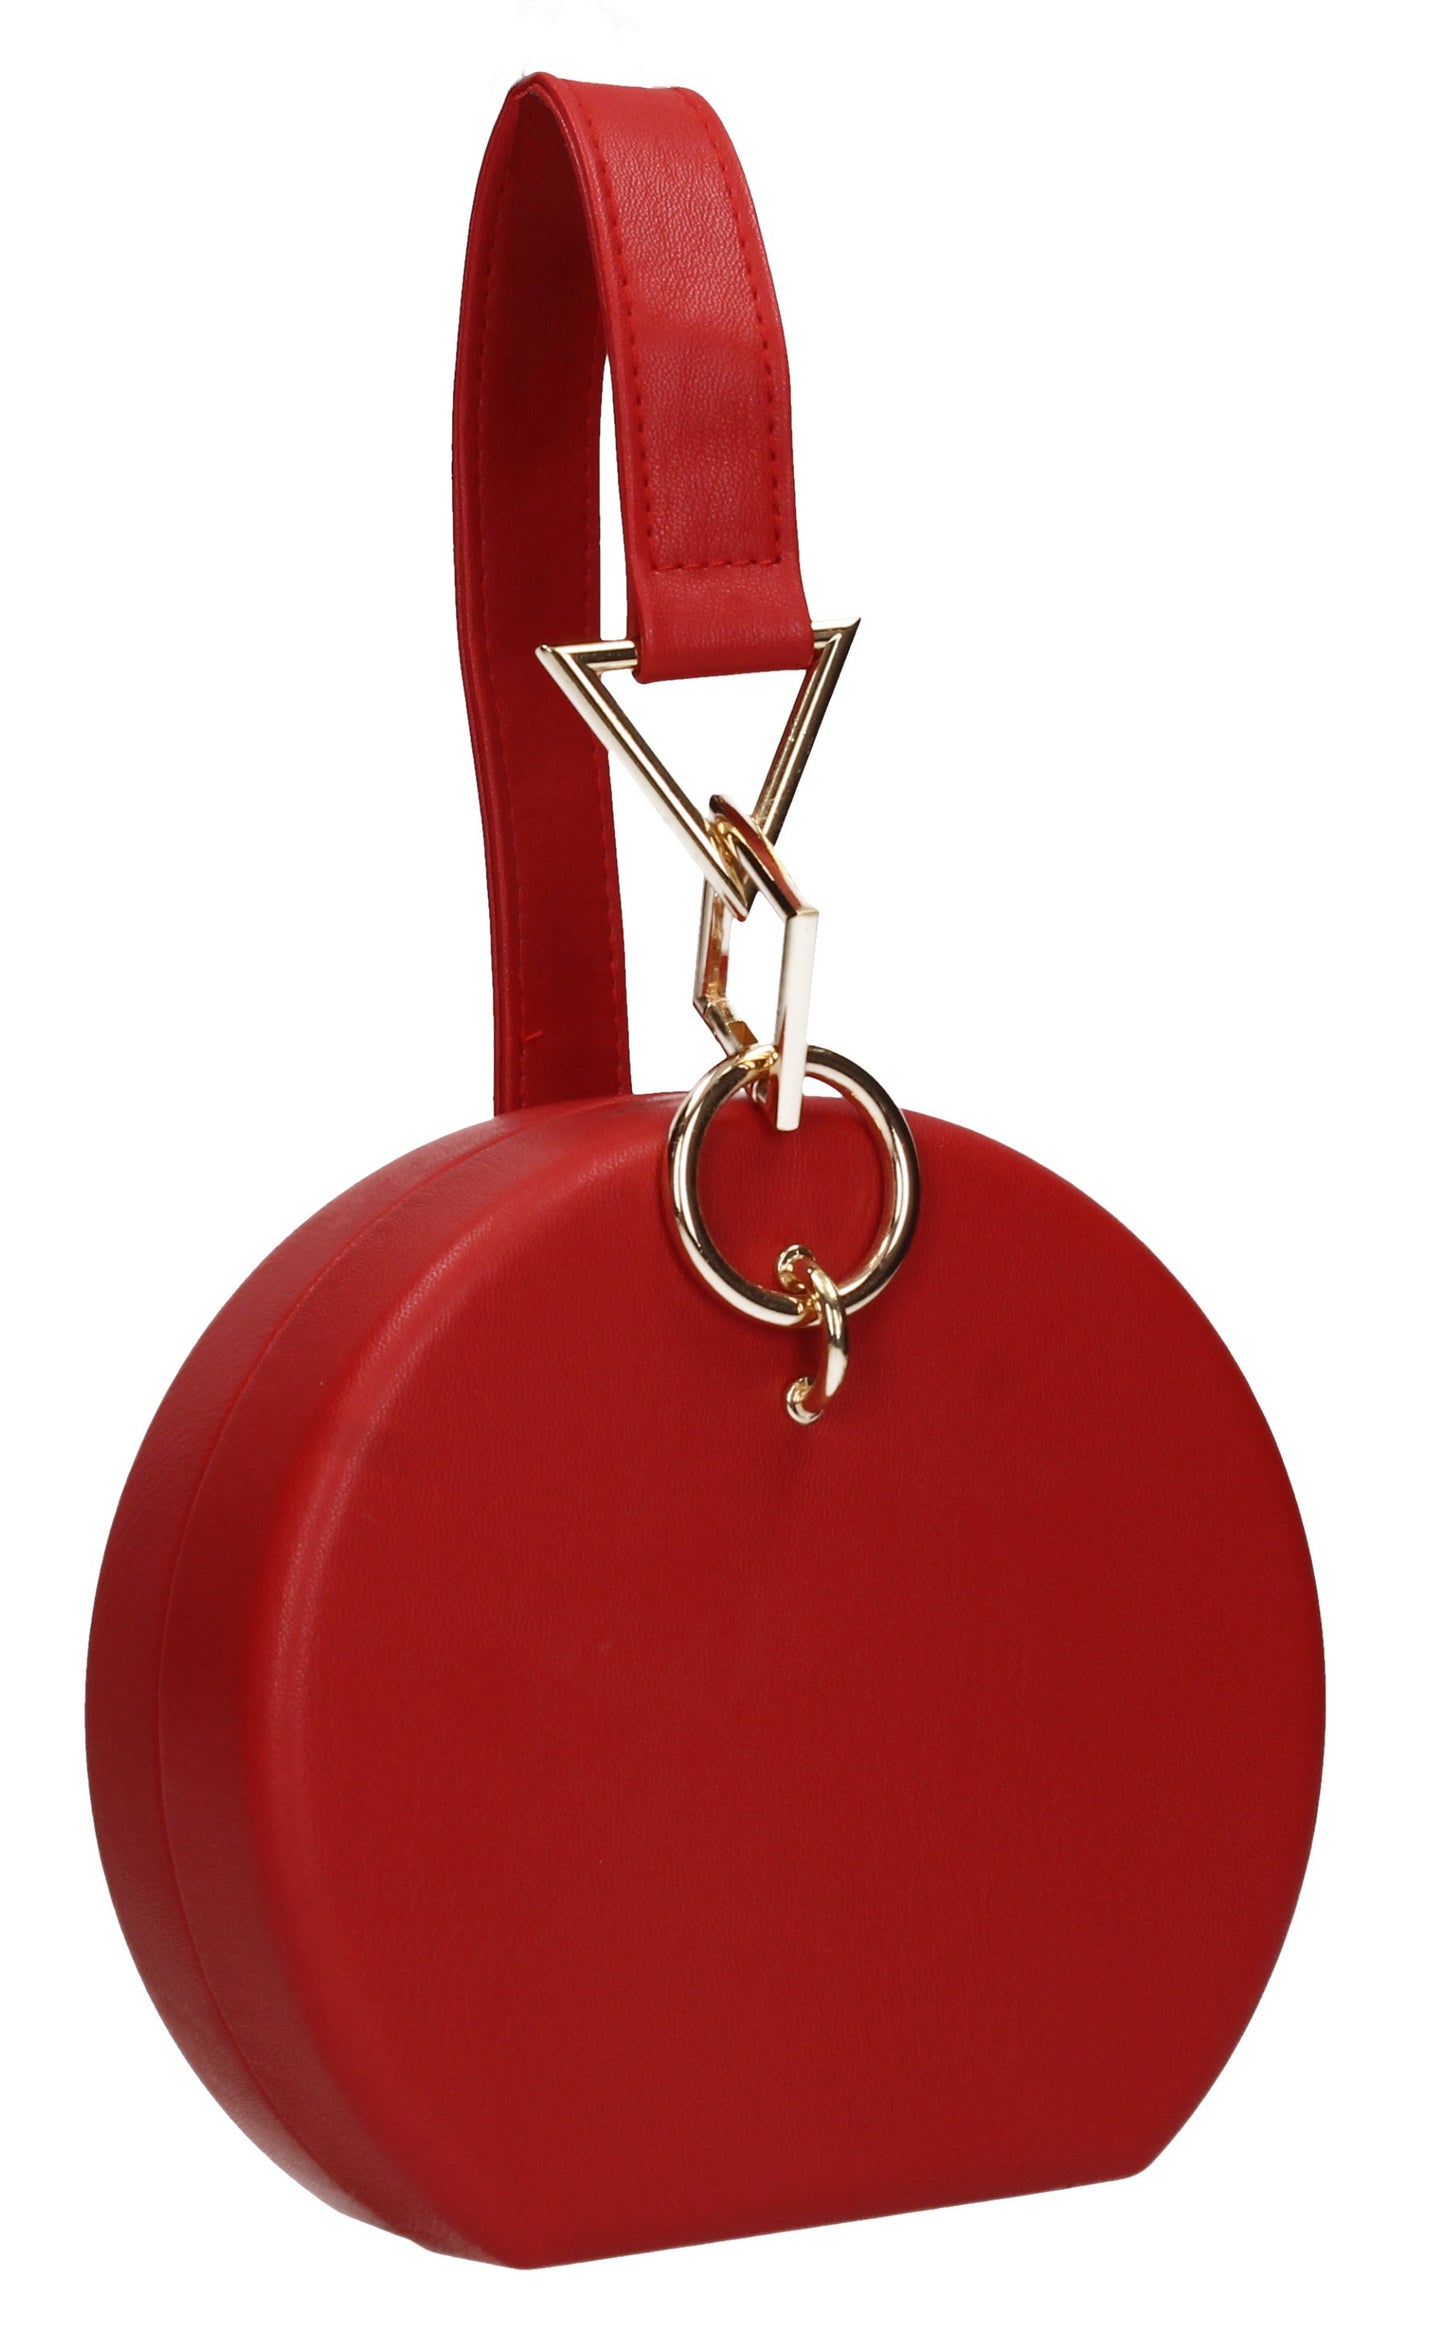 Rayne Circular Style Faux Leather Clutch Bag Red